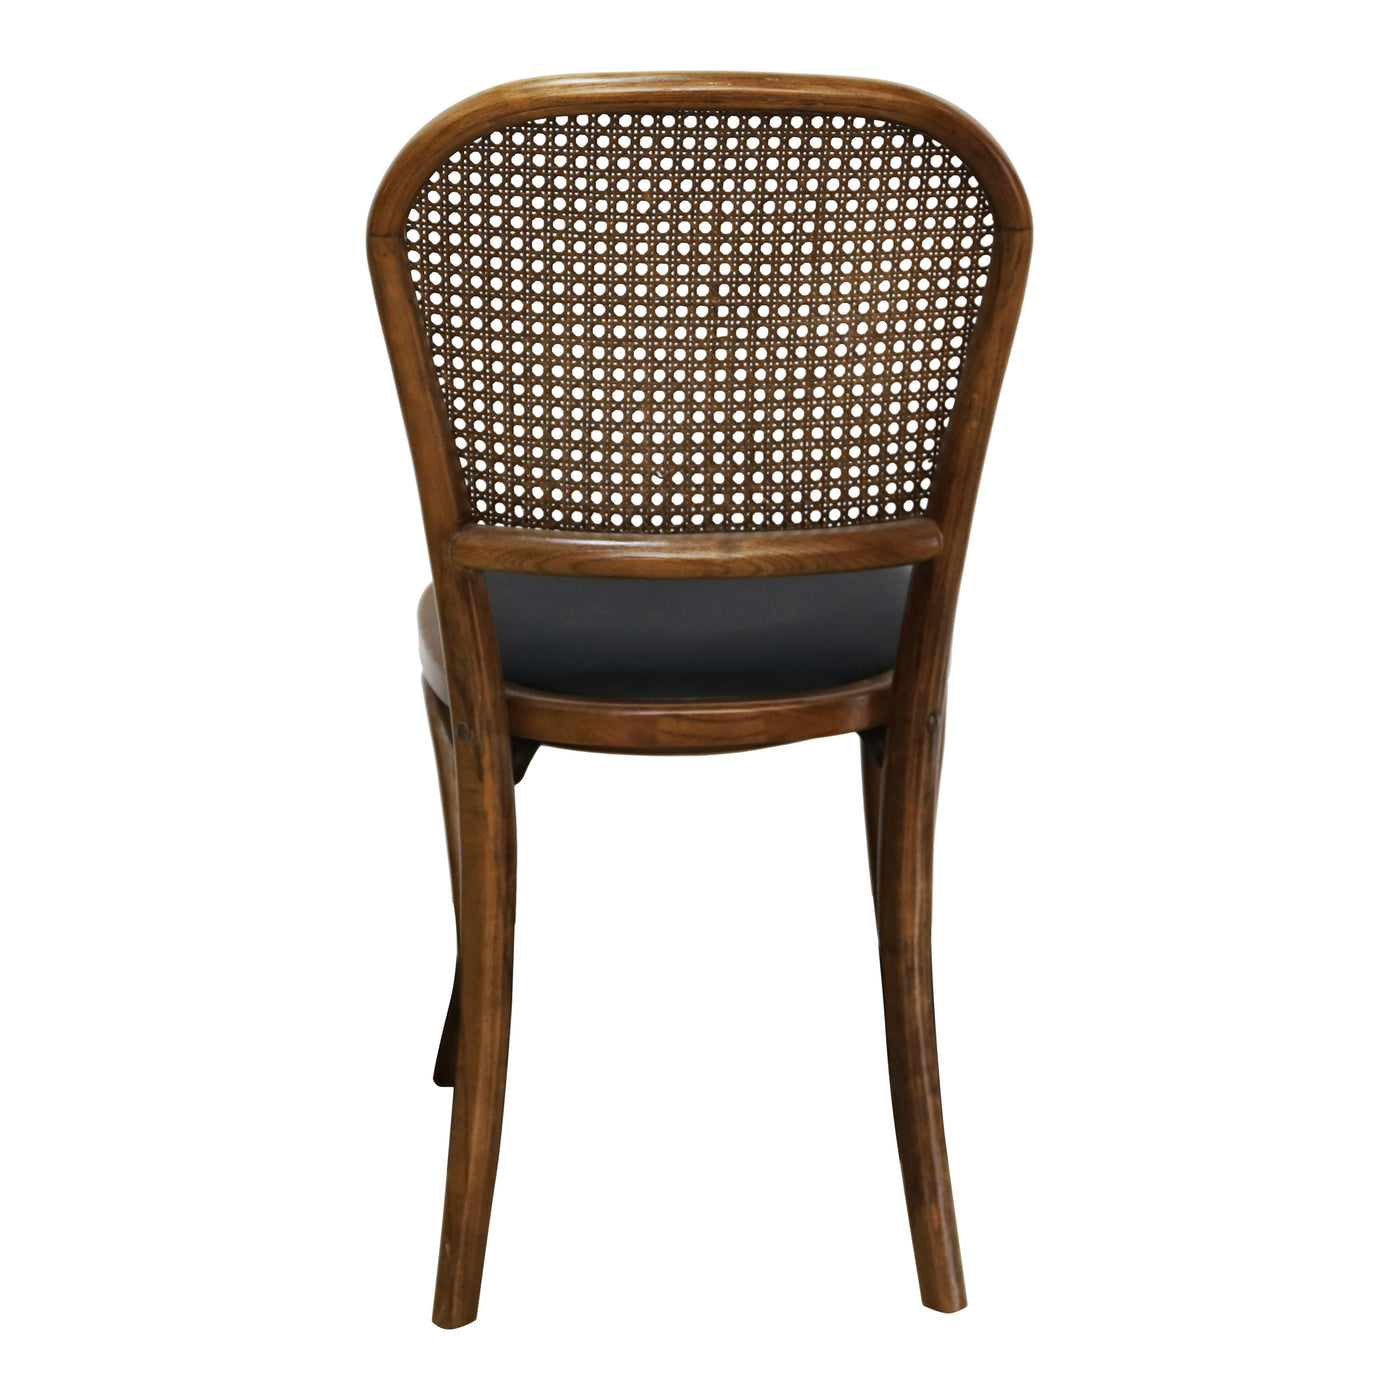 The Bedford Dining Chair will help achieve that down-to-earth, bohemian look you've been dreaming about for your home. Wit...